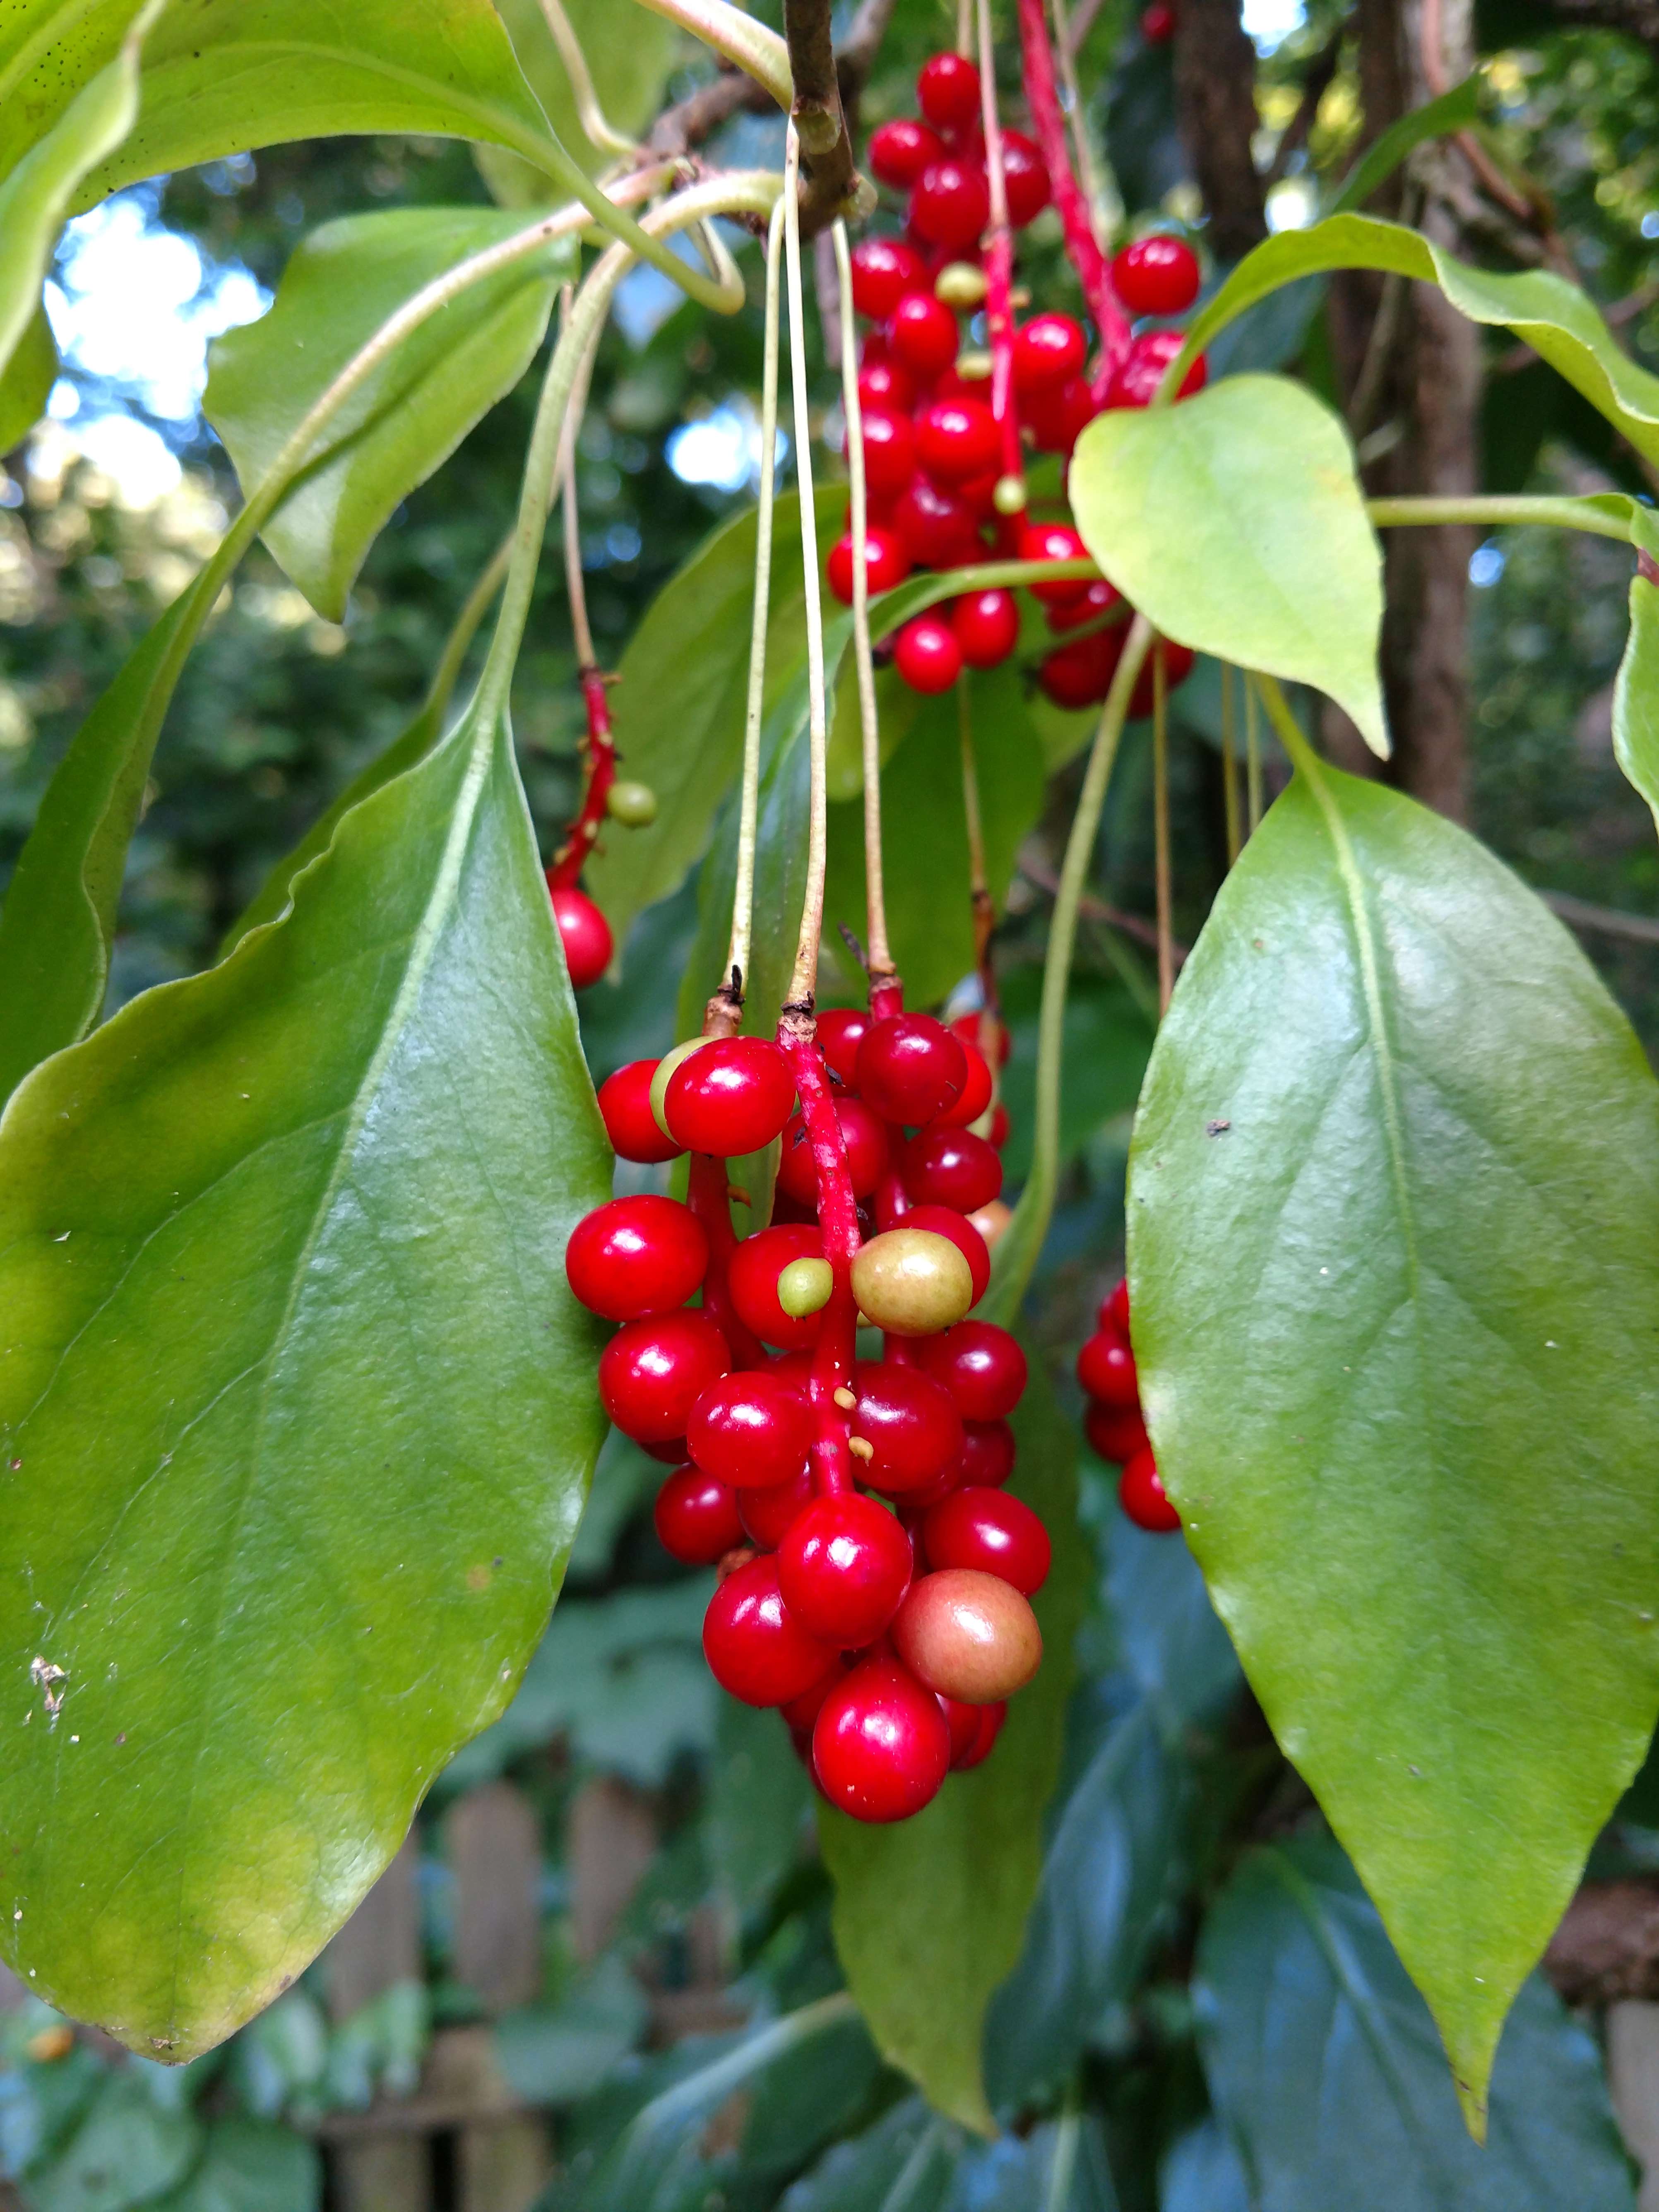 The Scientific Name is Schisandra glabra. You will likely hear them called Star-vine, Climbing-magnolia, Magnolia-vine. This picture shows the Bright red berries on very long stems. of Schisandra glabra